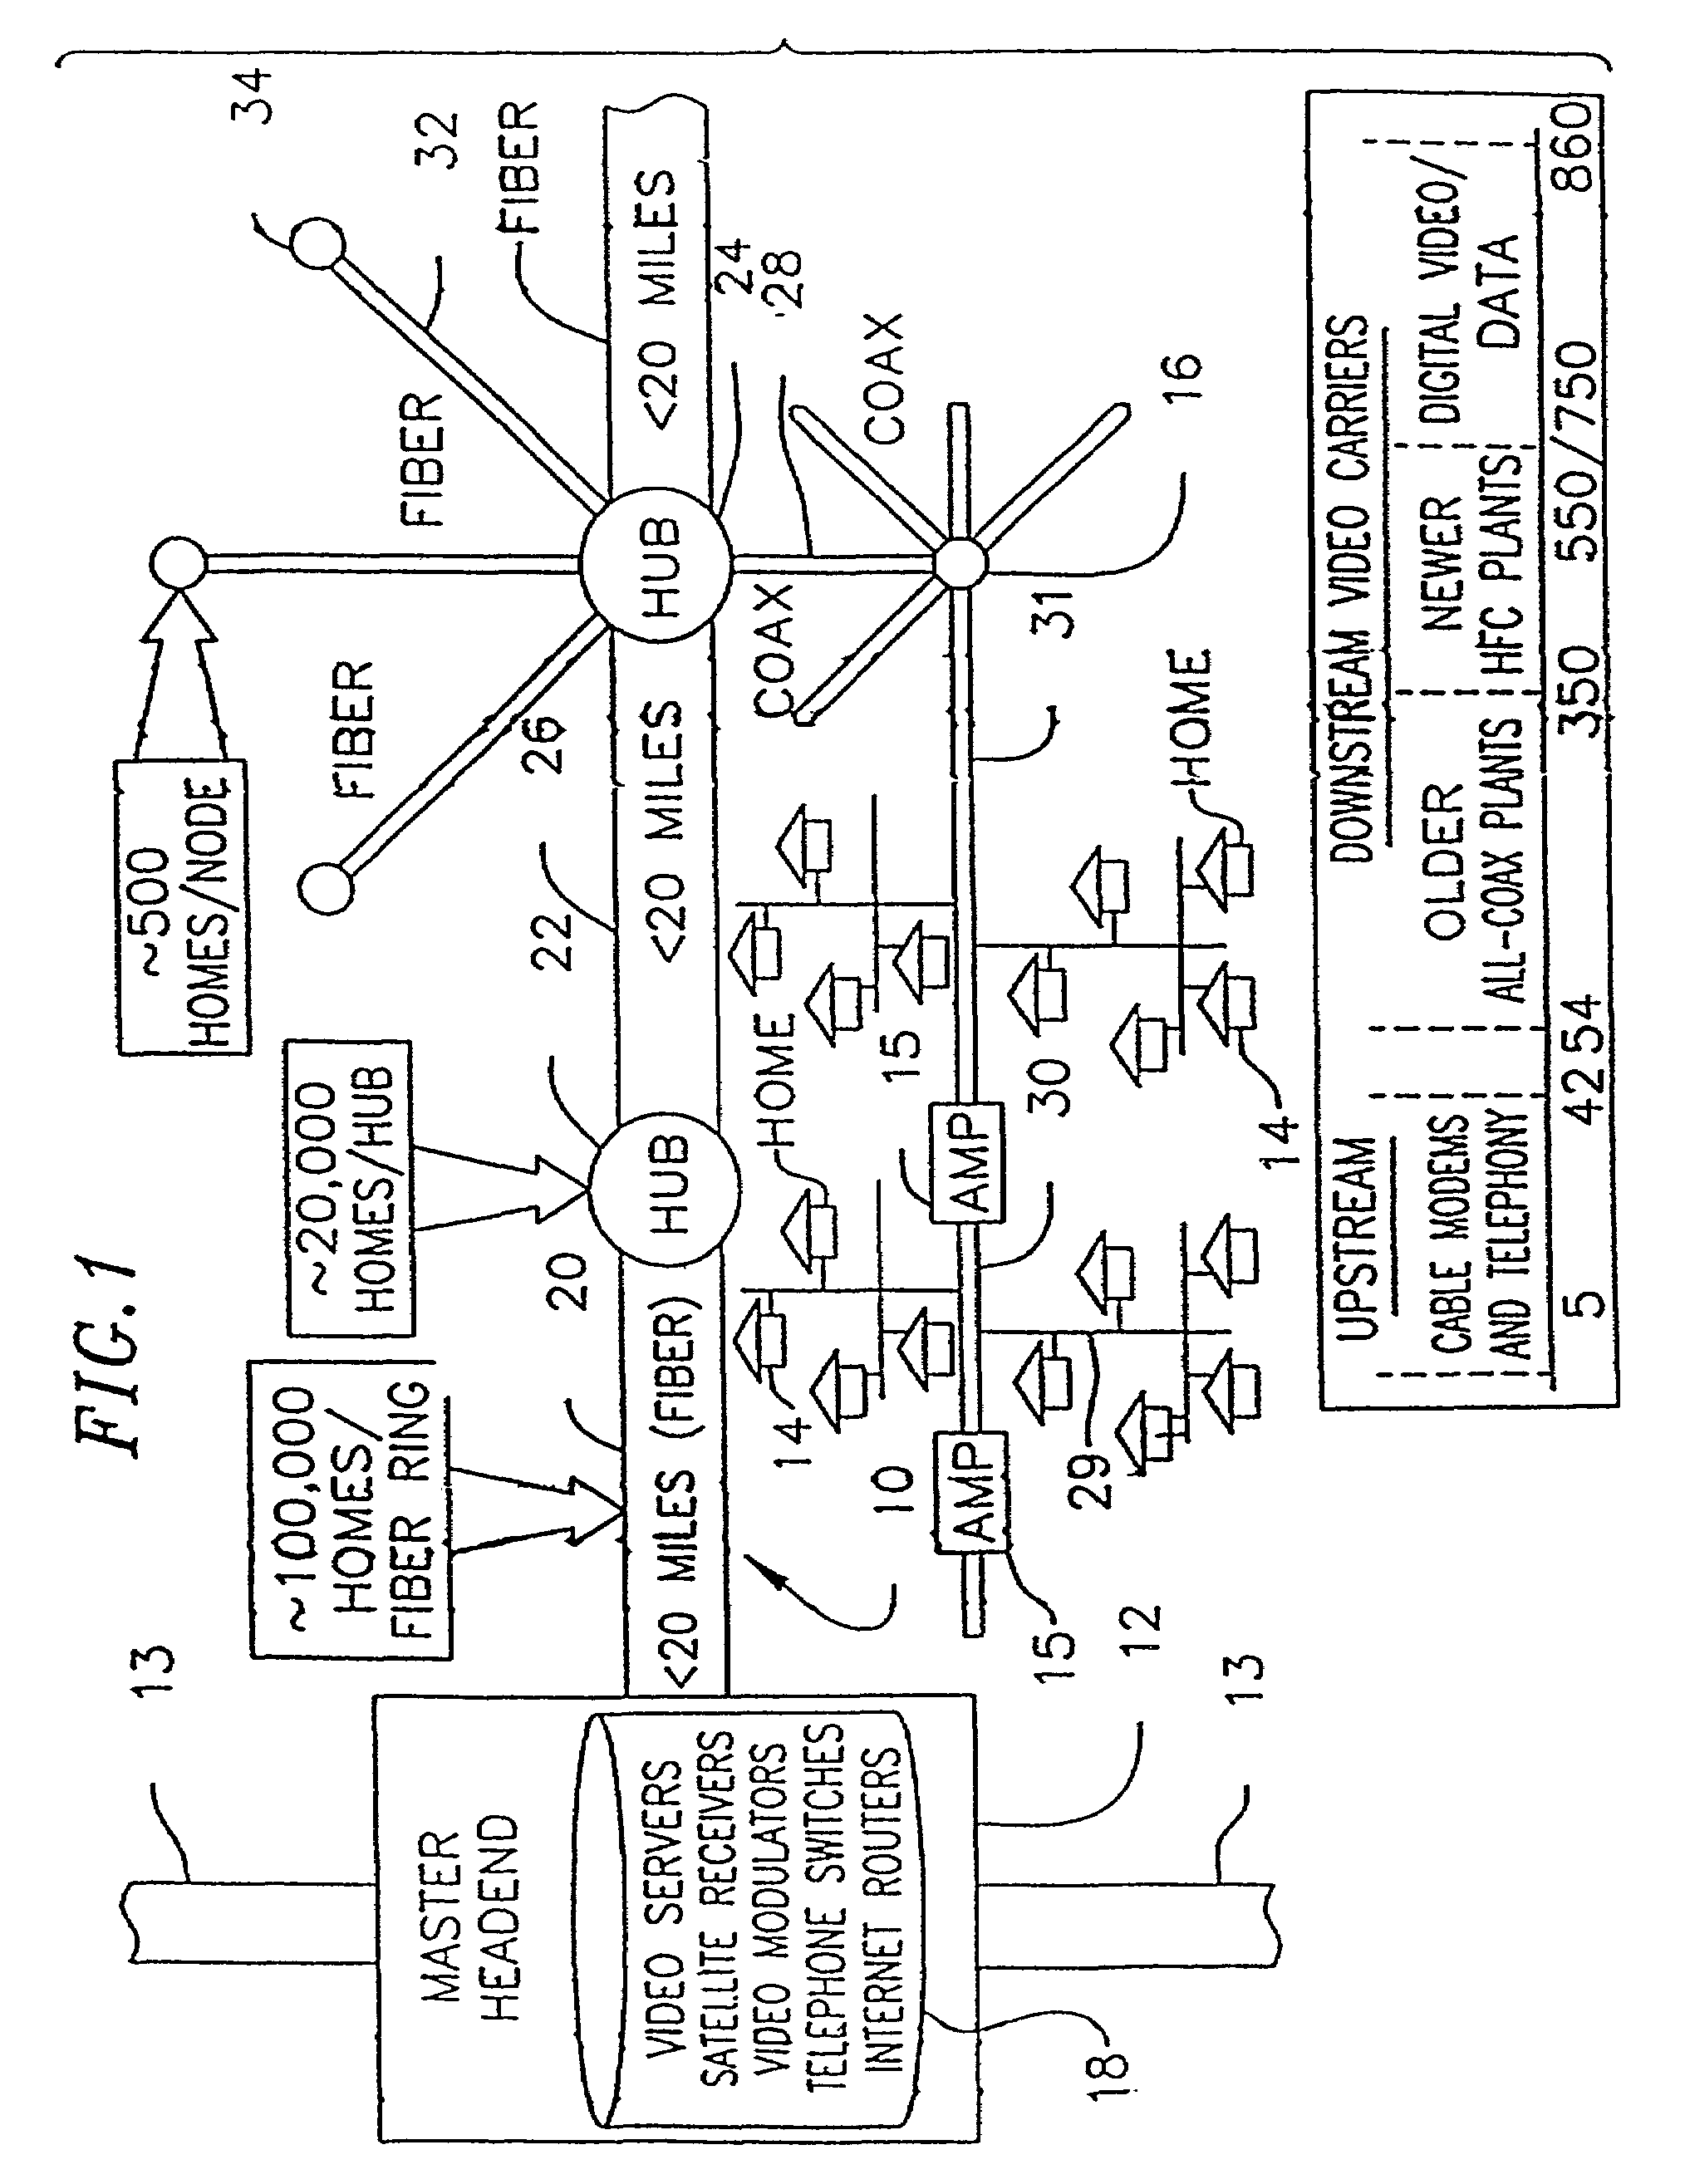 Method for opening a proprietary MAC protocol in a non-DOCSIS modem compatibly with a DOCSIS modem